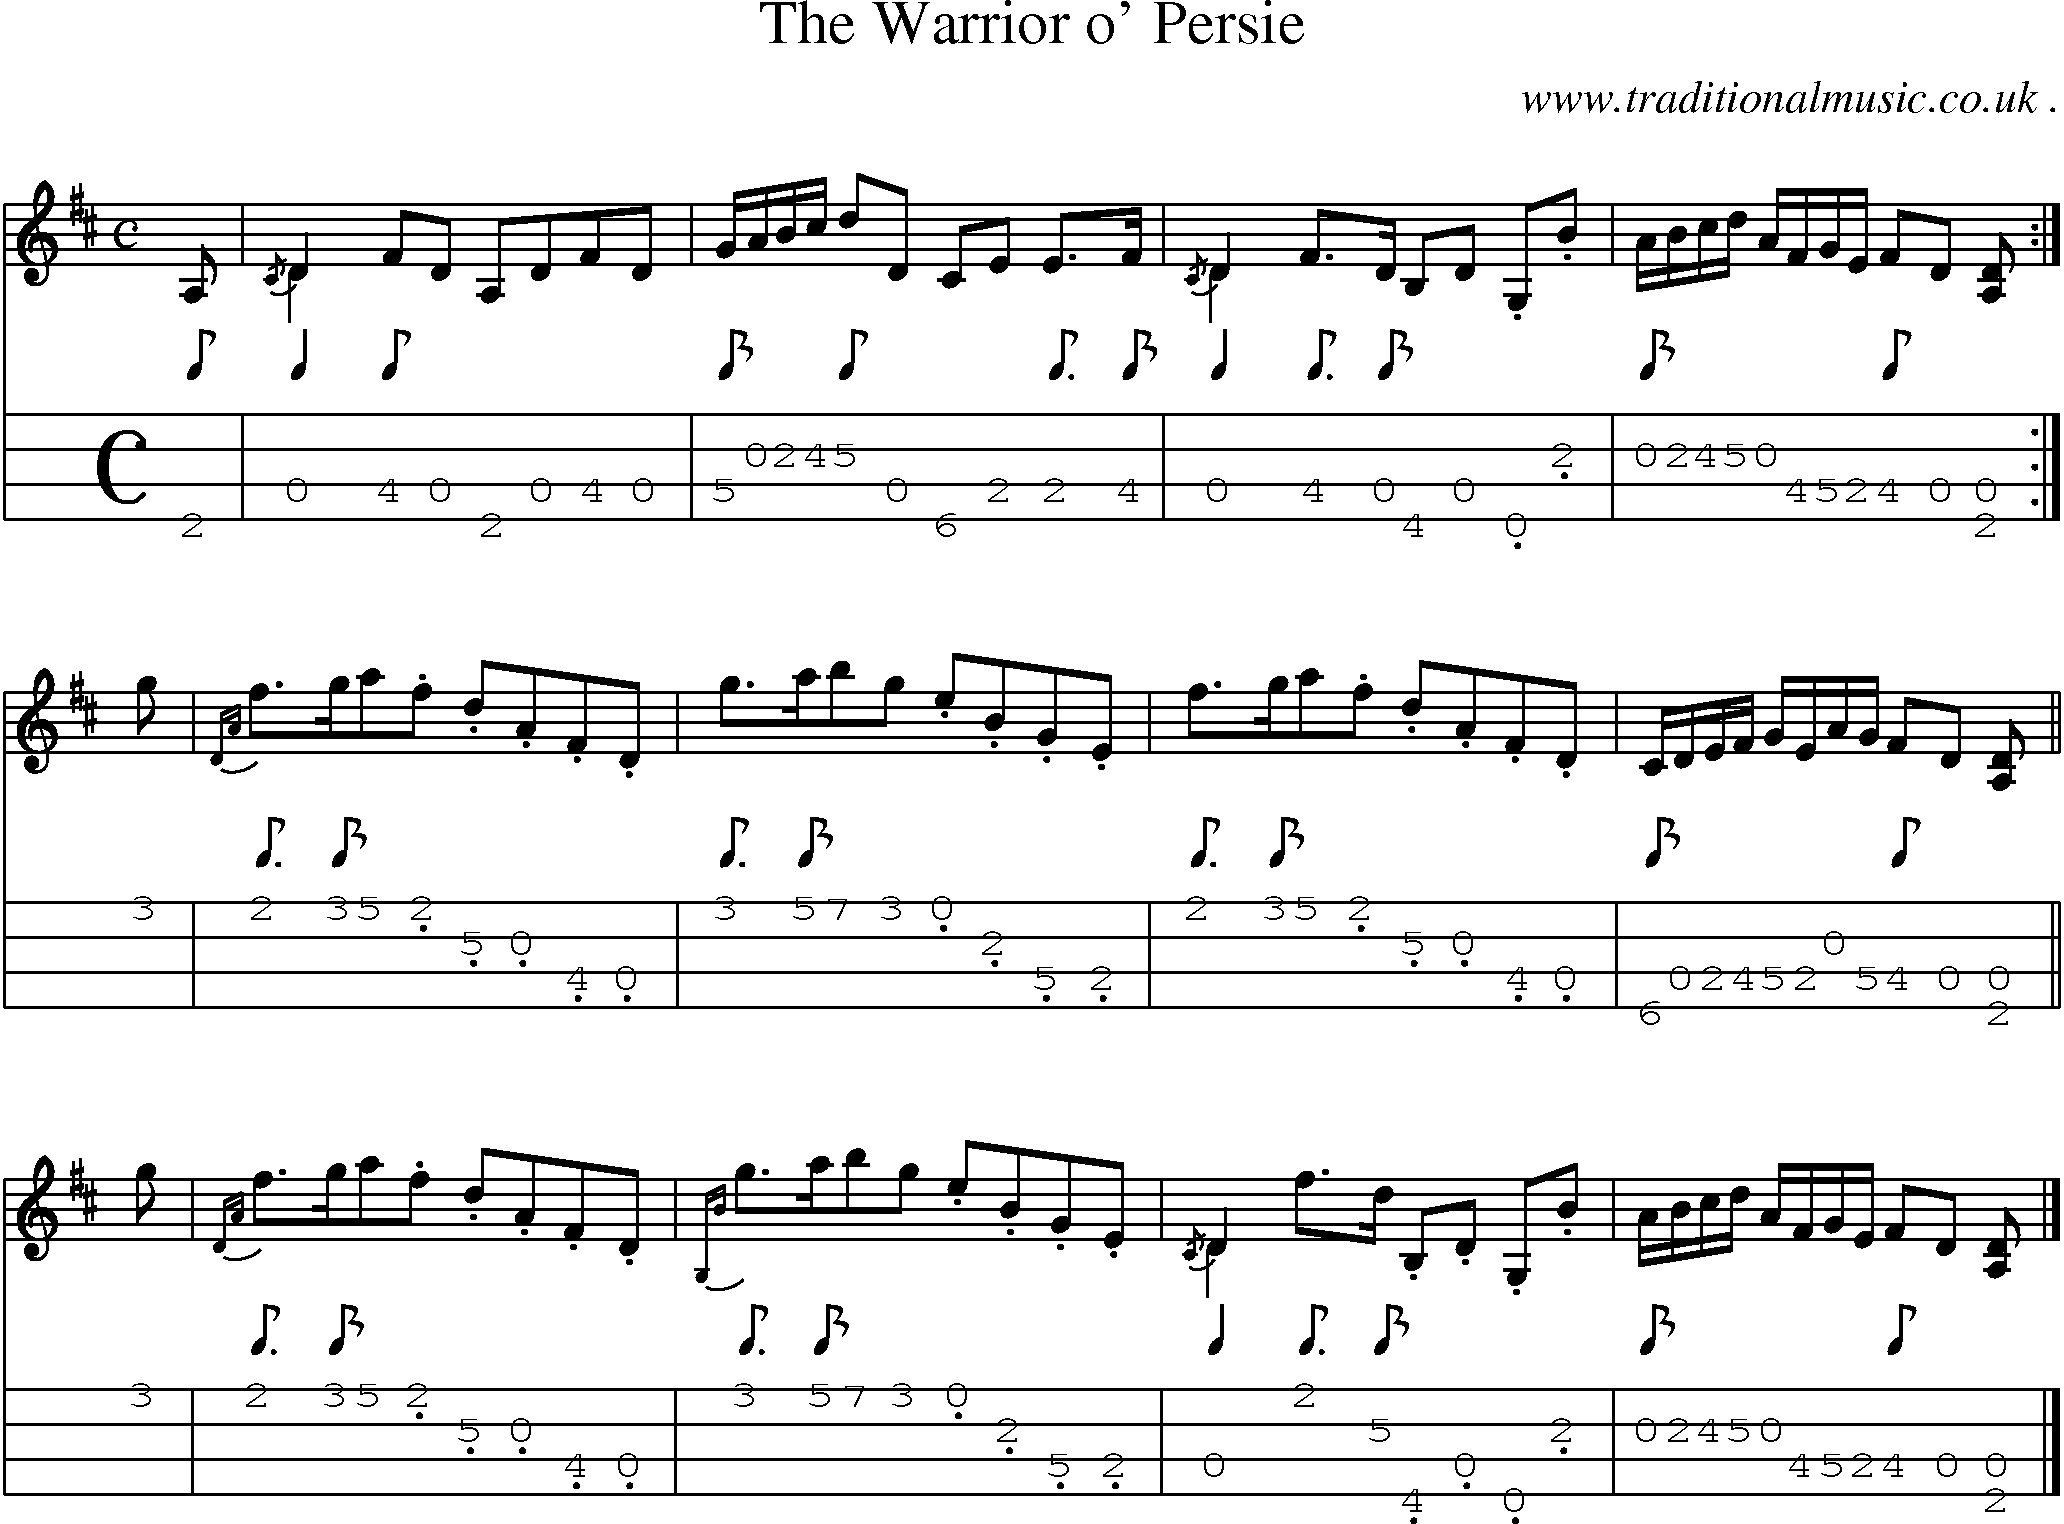 Sheet-music  score, Chords and Mandolin Tabs for The Warrior O Persie